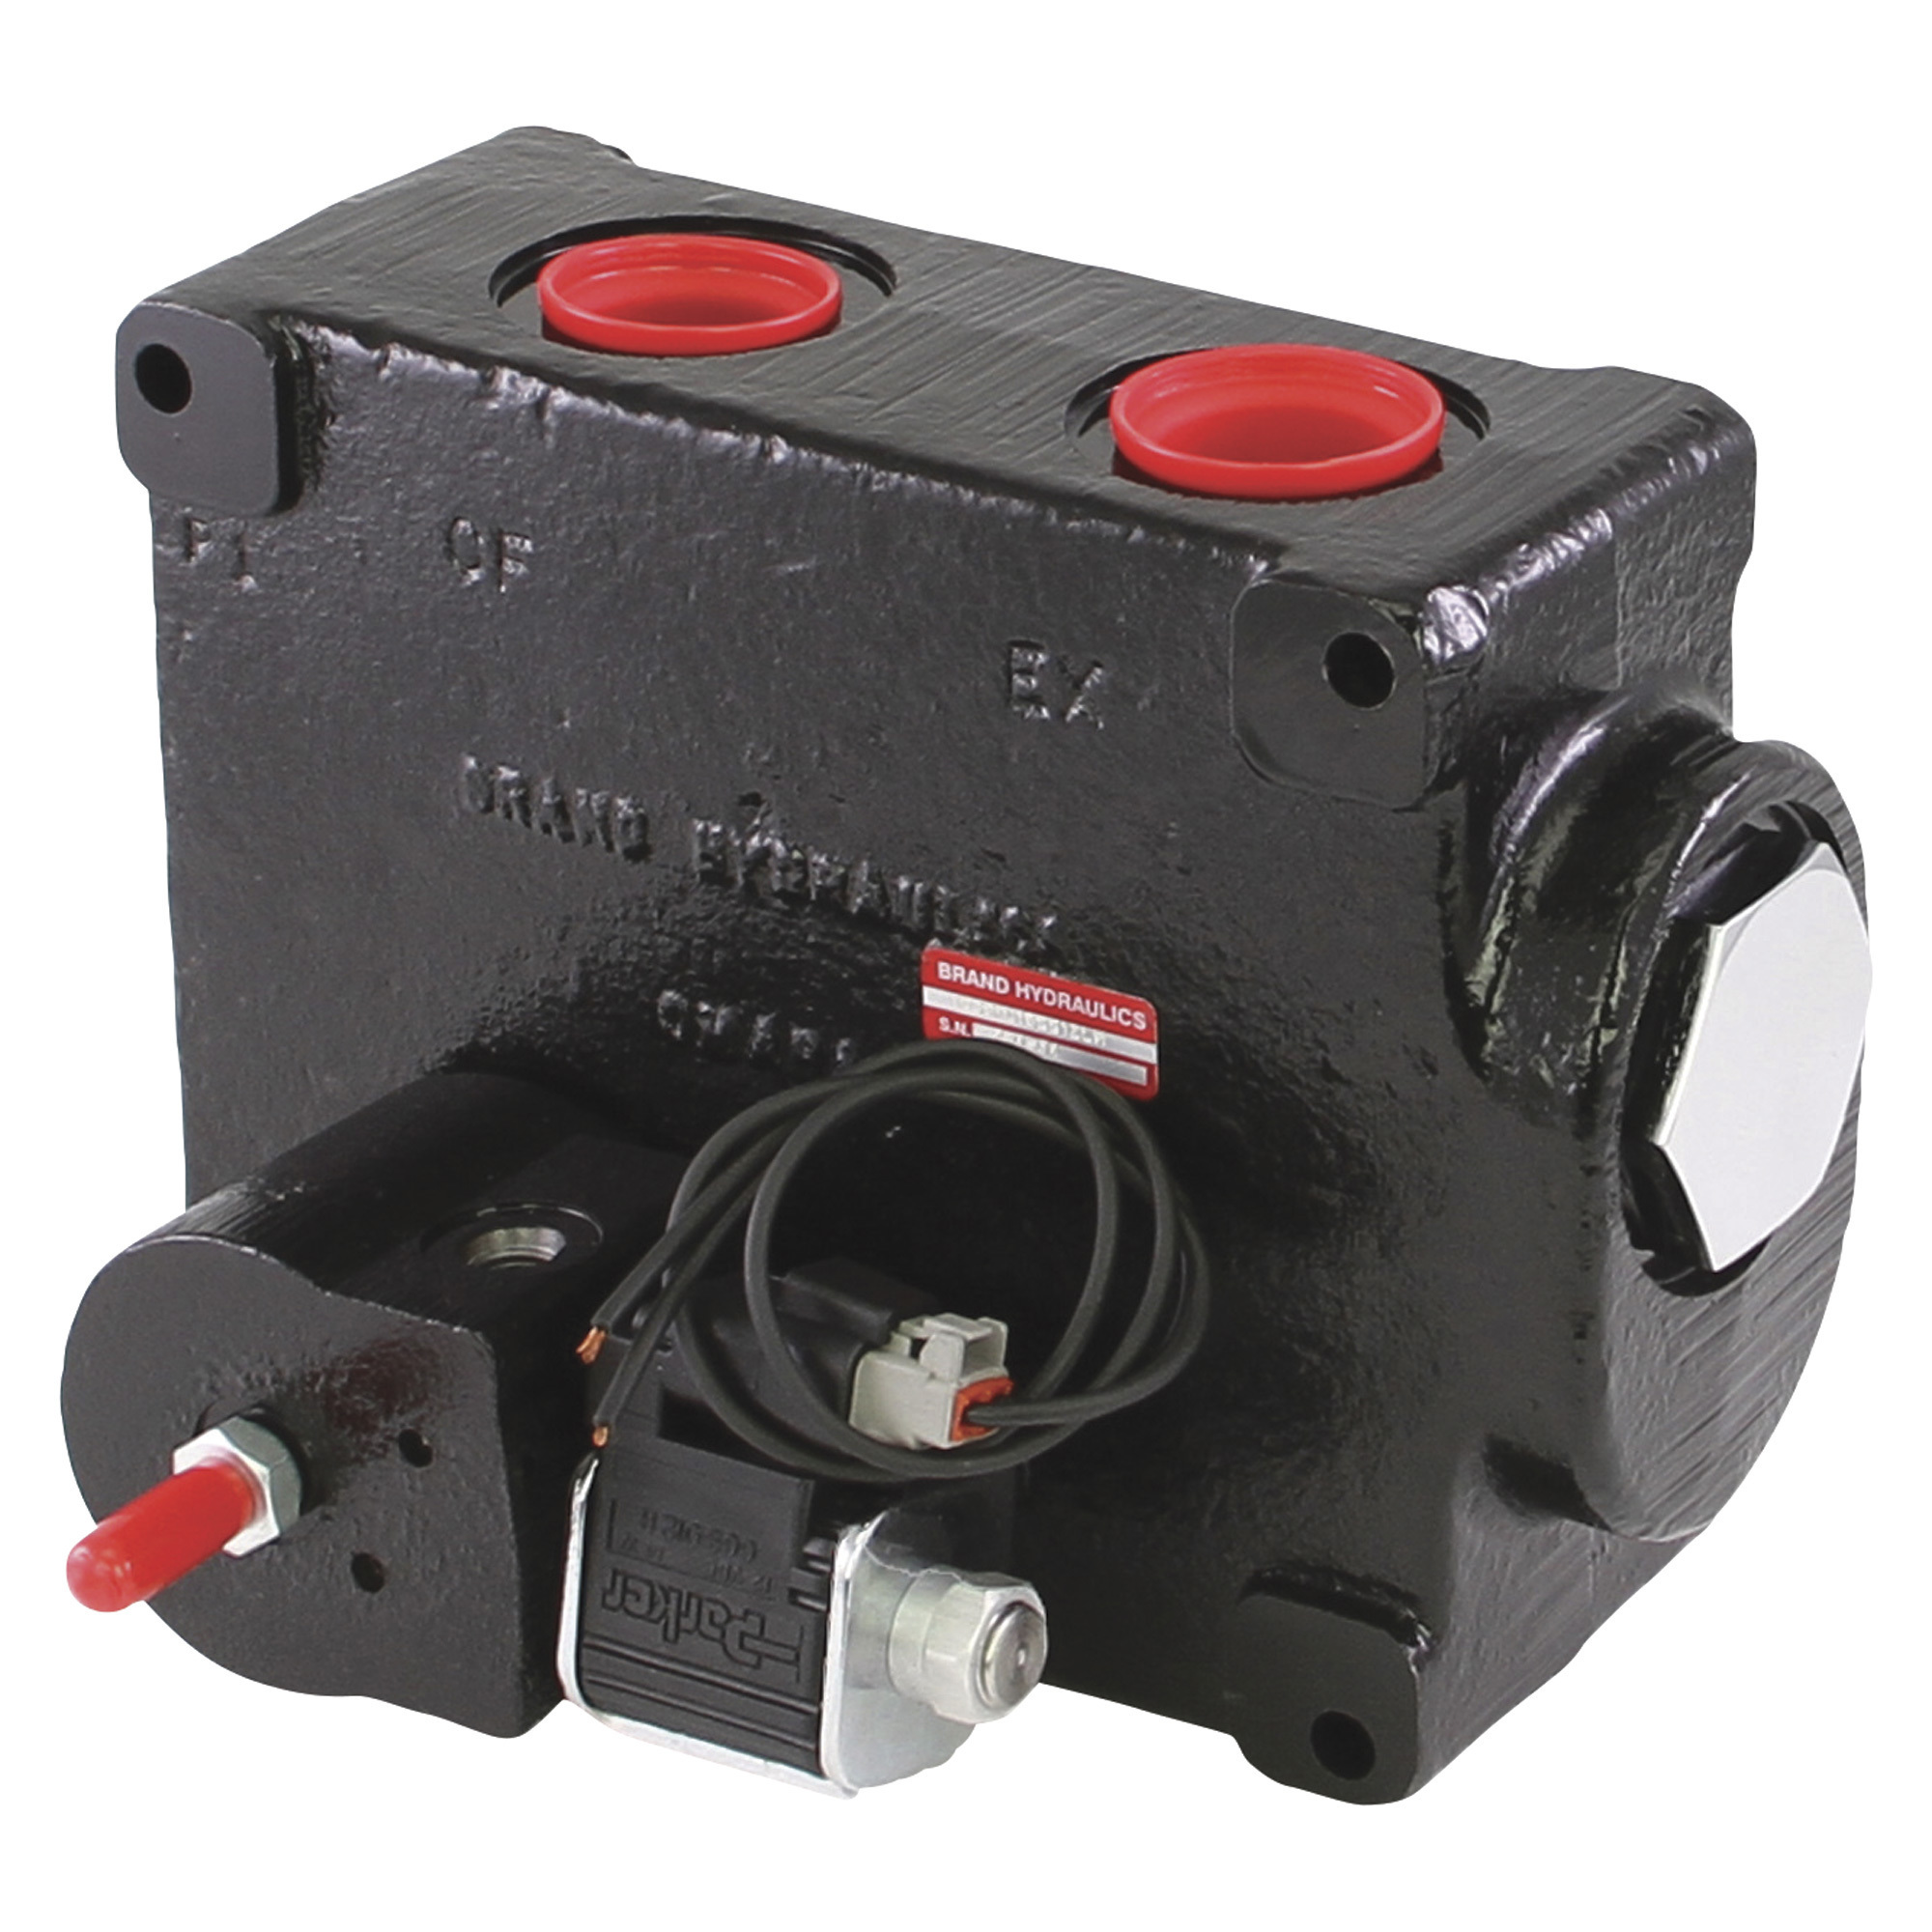 Brand Hydraulics Electronically Adjustable Flow Control Valve â 0â55 GPM, 3,000 PSI, Model PLEFC165512LM